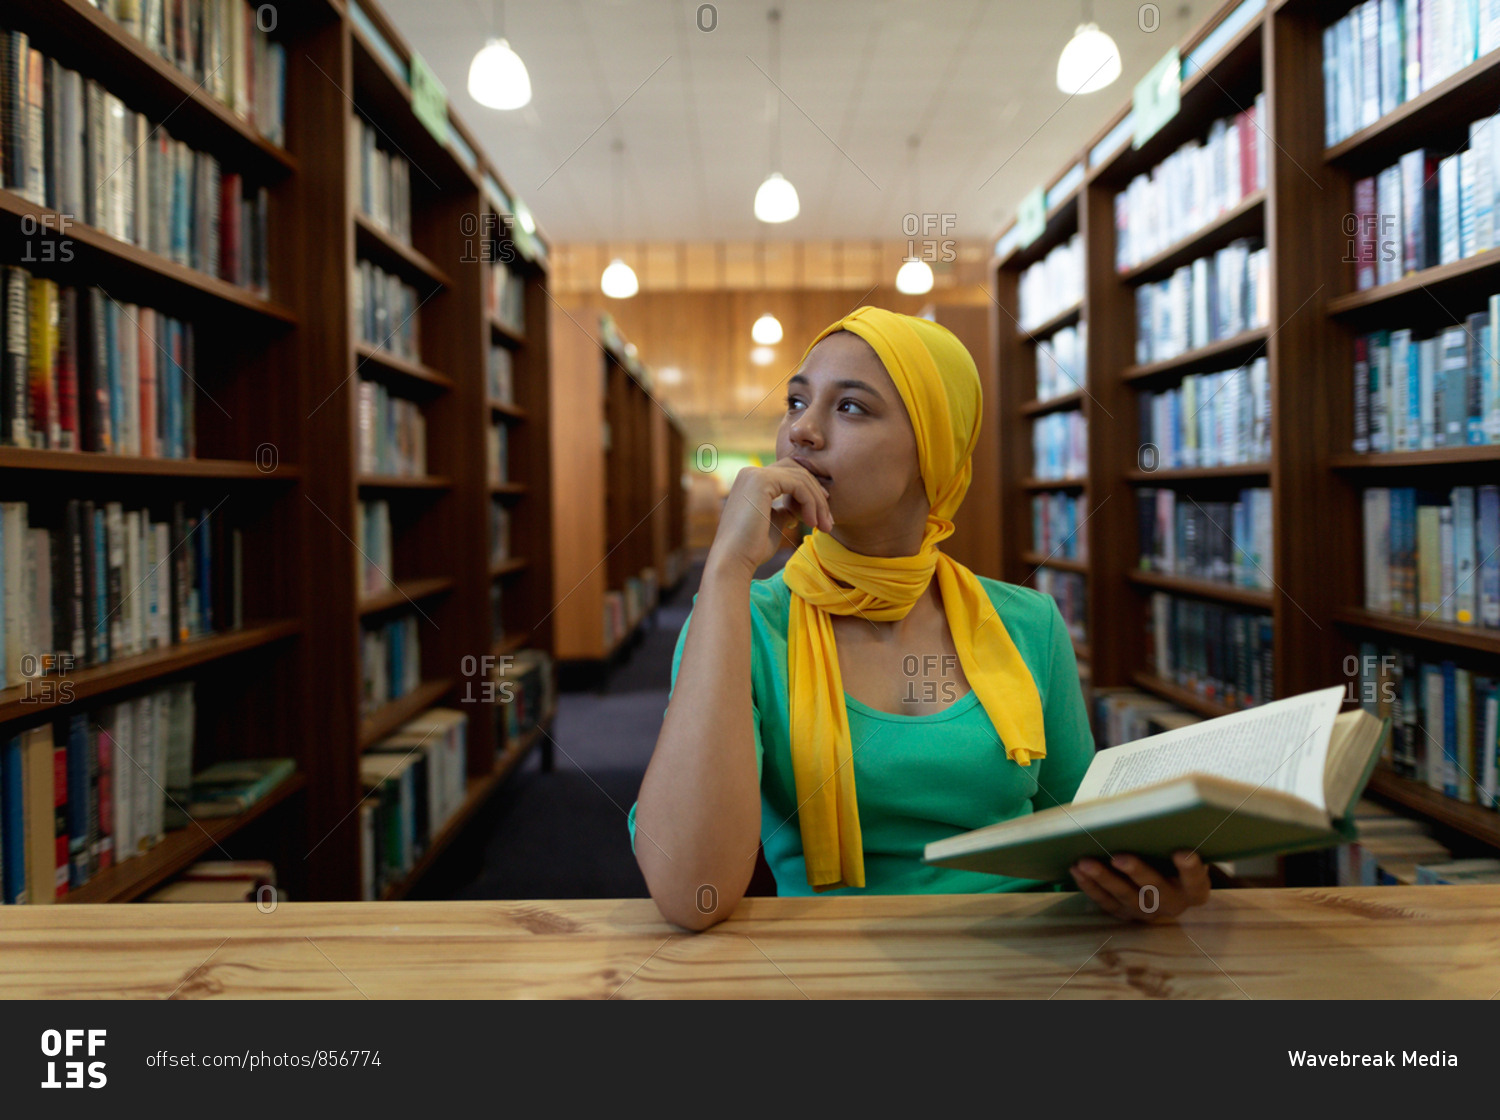 Front view close up of a young Asian female student wearing a hijab holding a book and studying in a library